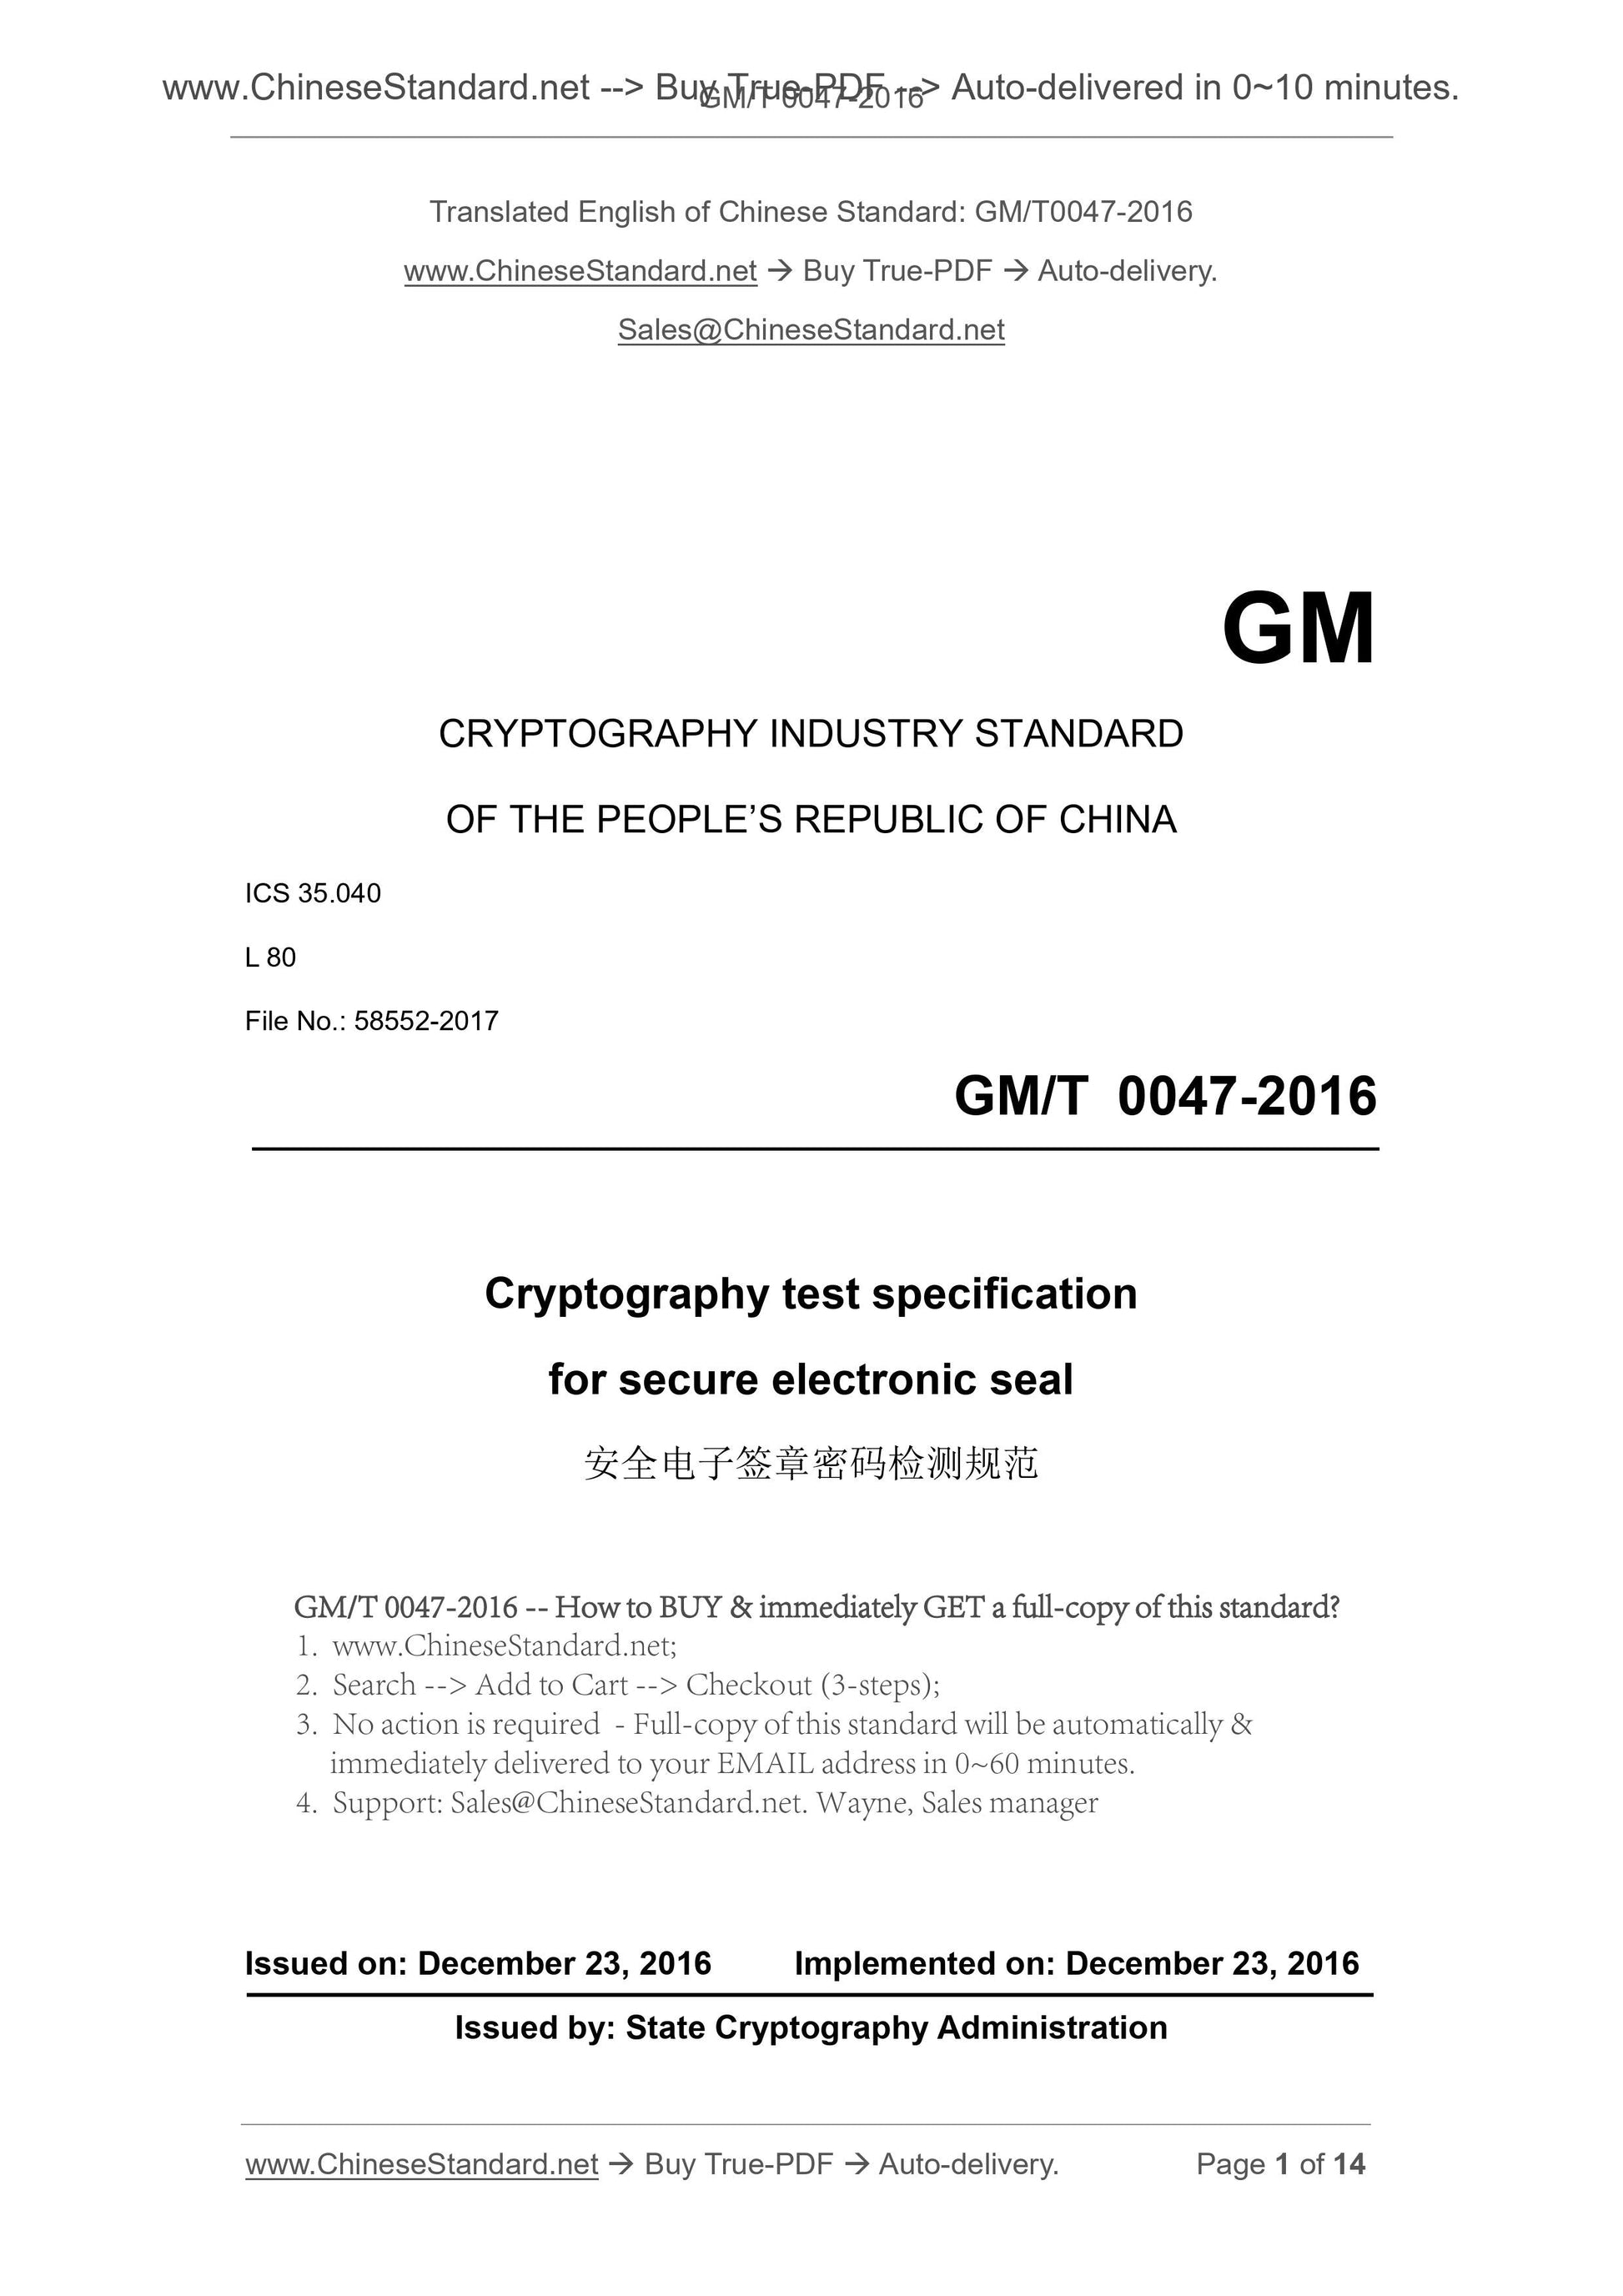 GM/T 0047-2016 Page 1